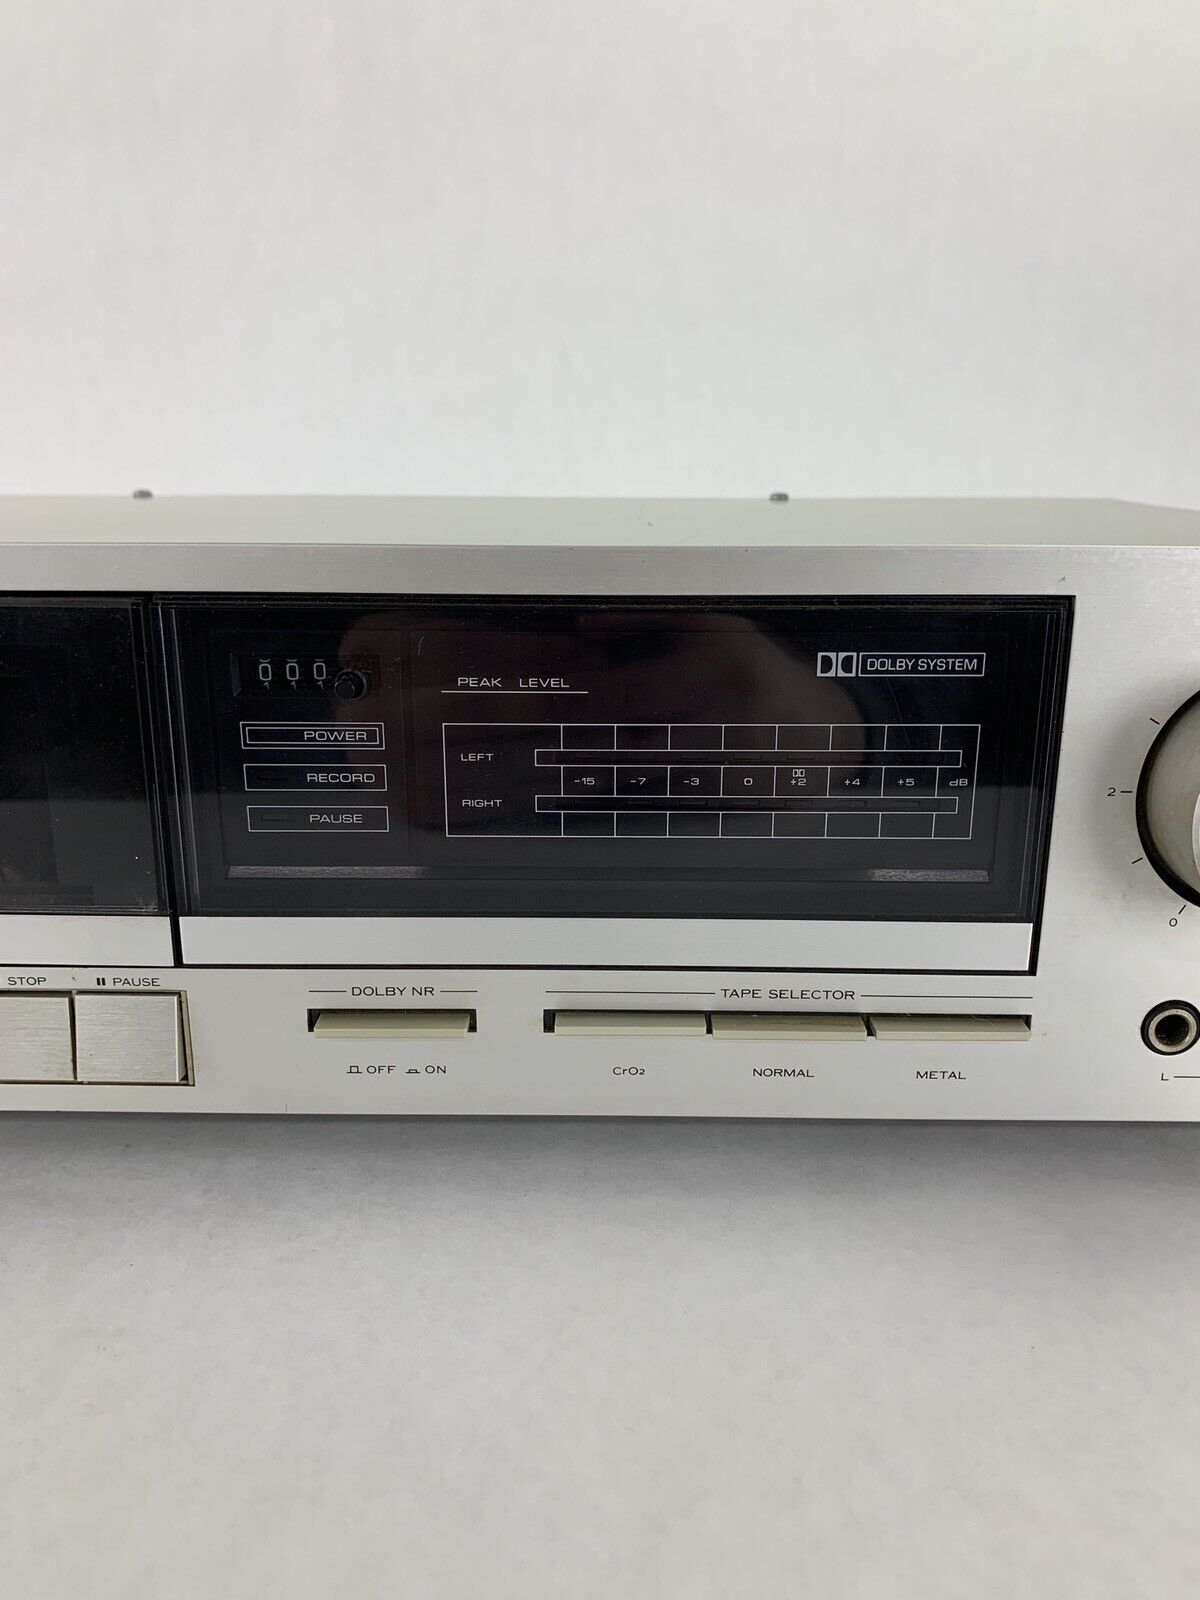 Vintage Kenwood KX-50 Stereo Cassette Deck For Parts and Repair